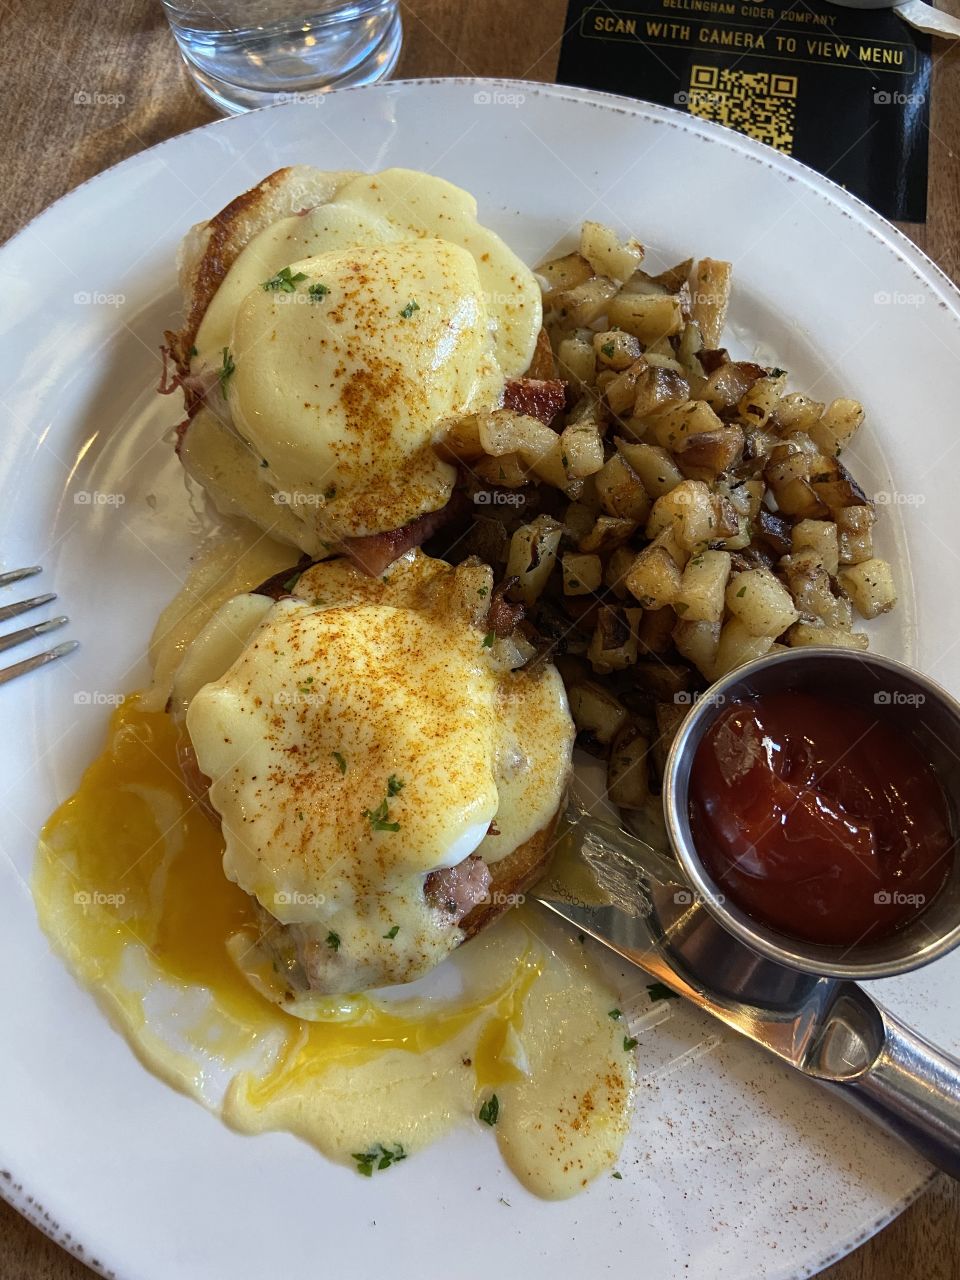 A yummy traditional eggs Benedict, and a side of golden delicious potatoes! 